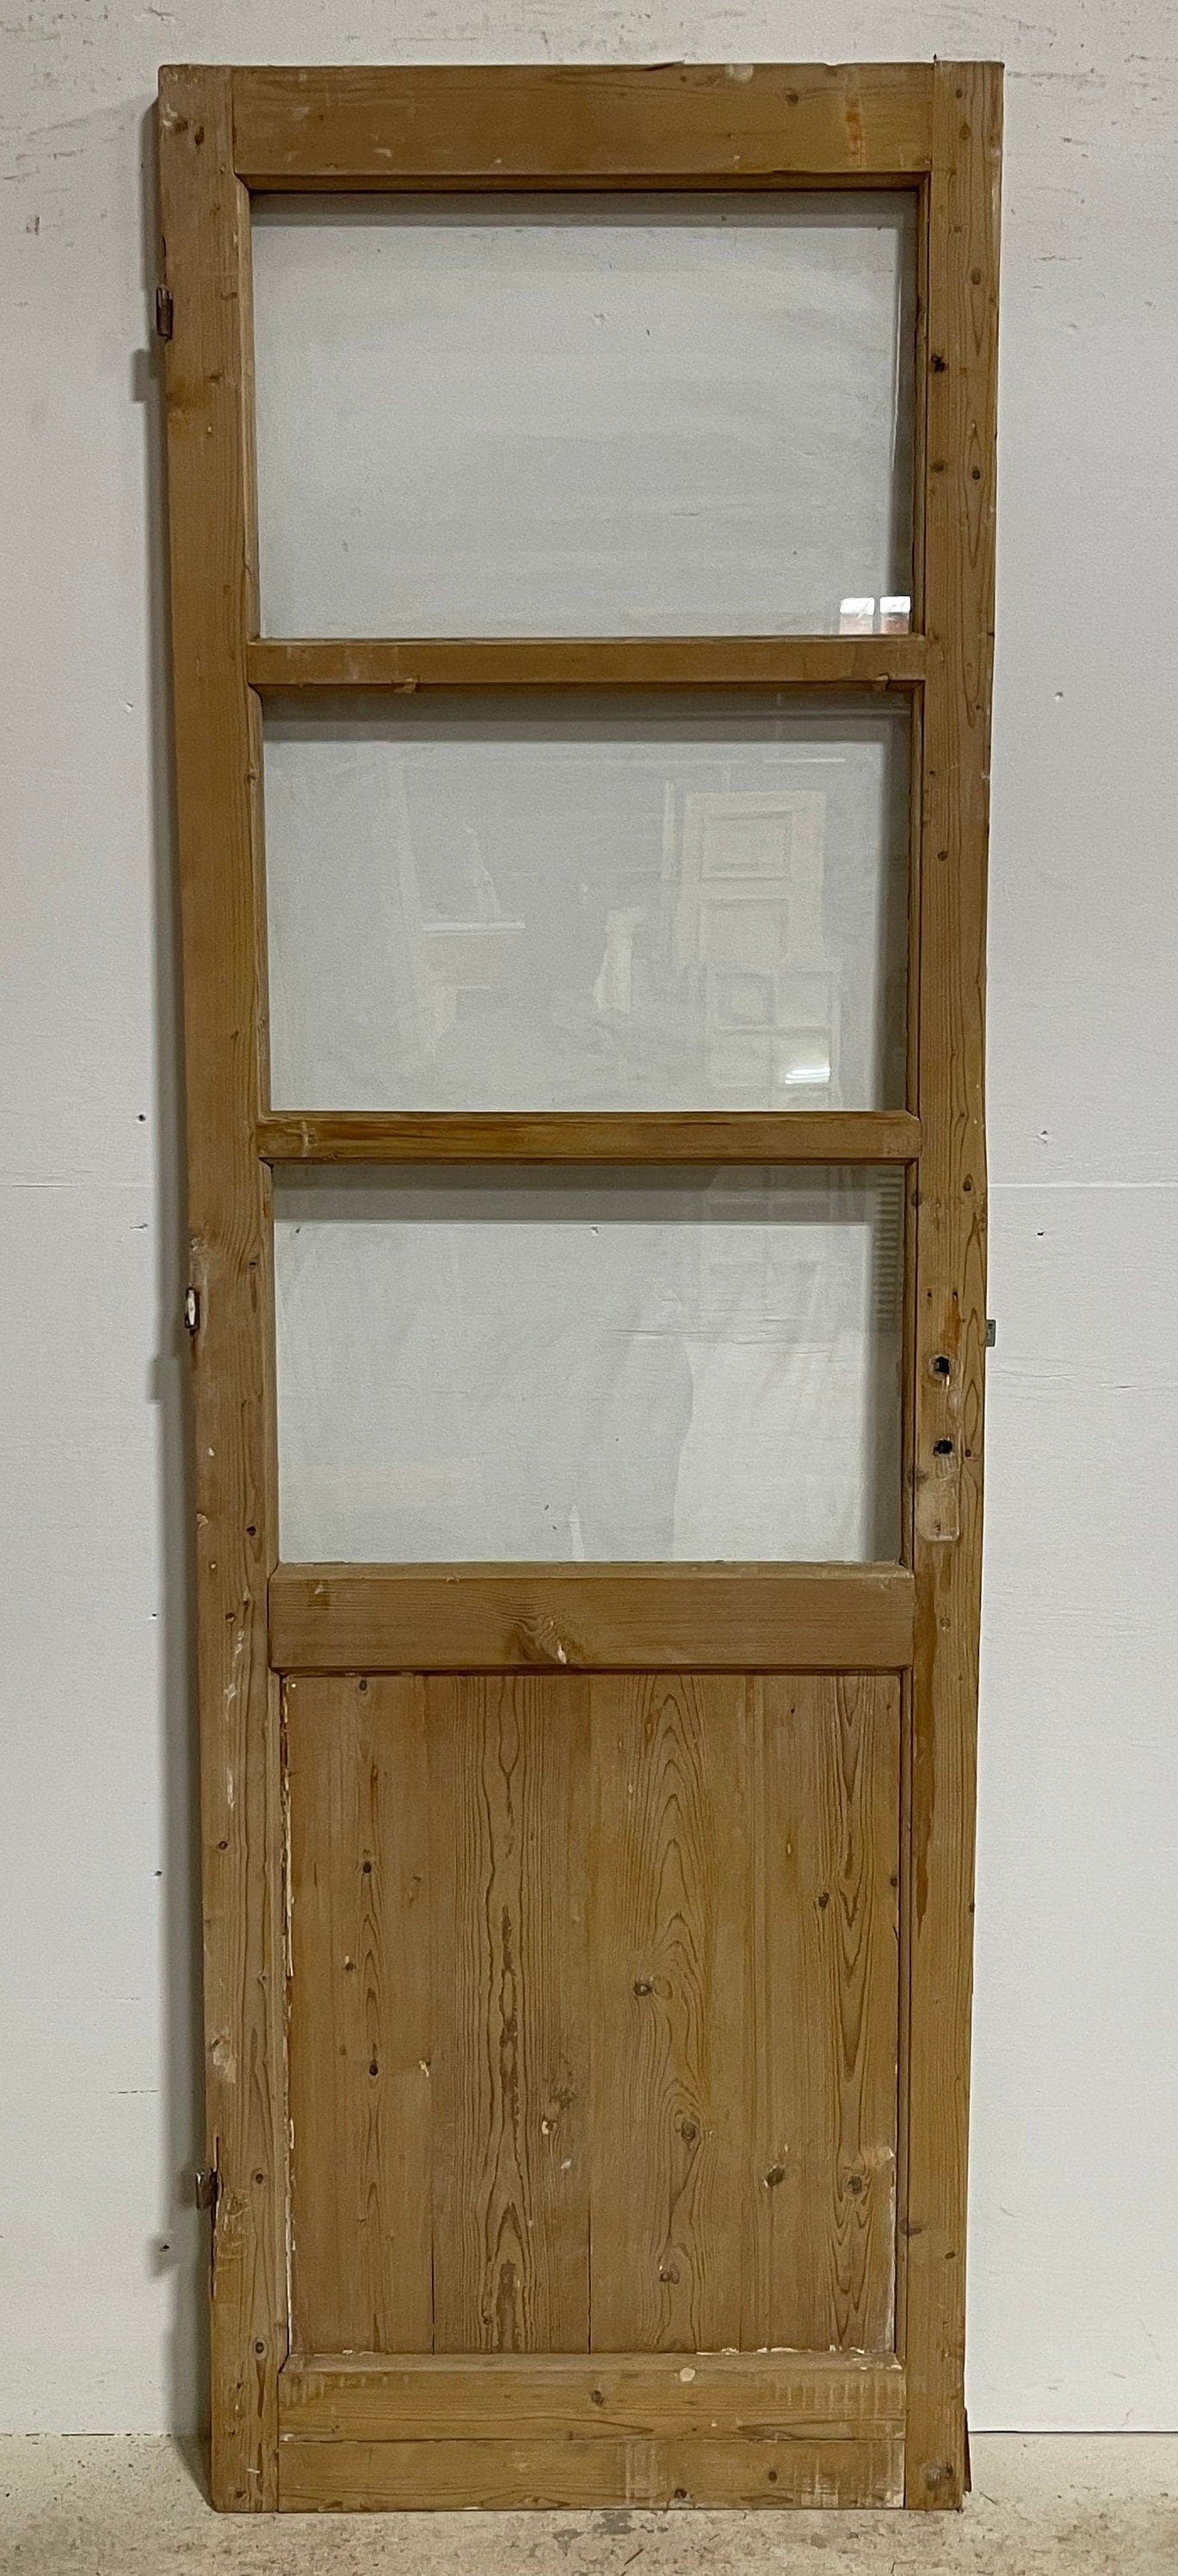 Antique French panel door with glass (85x27.5) G1496s